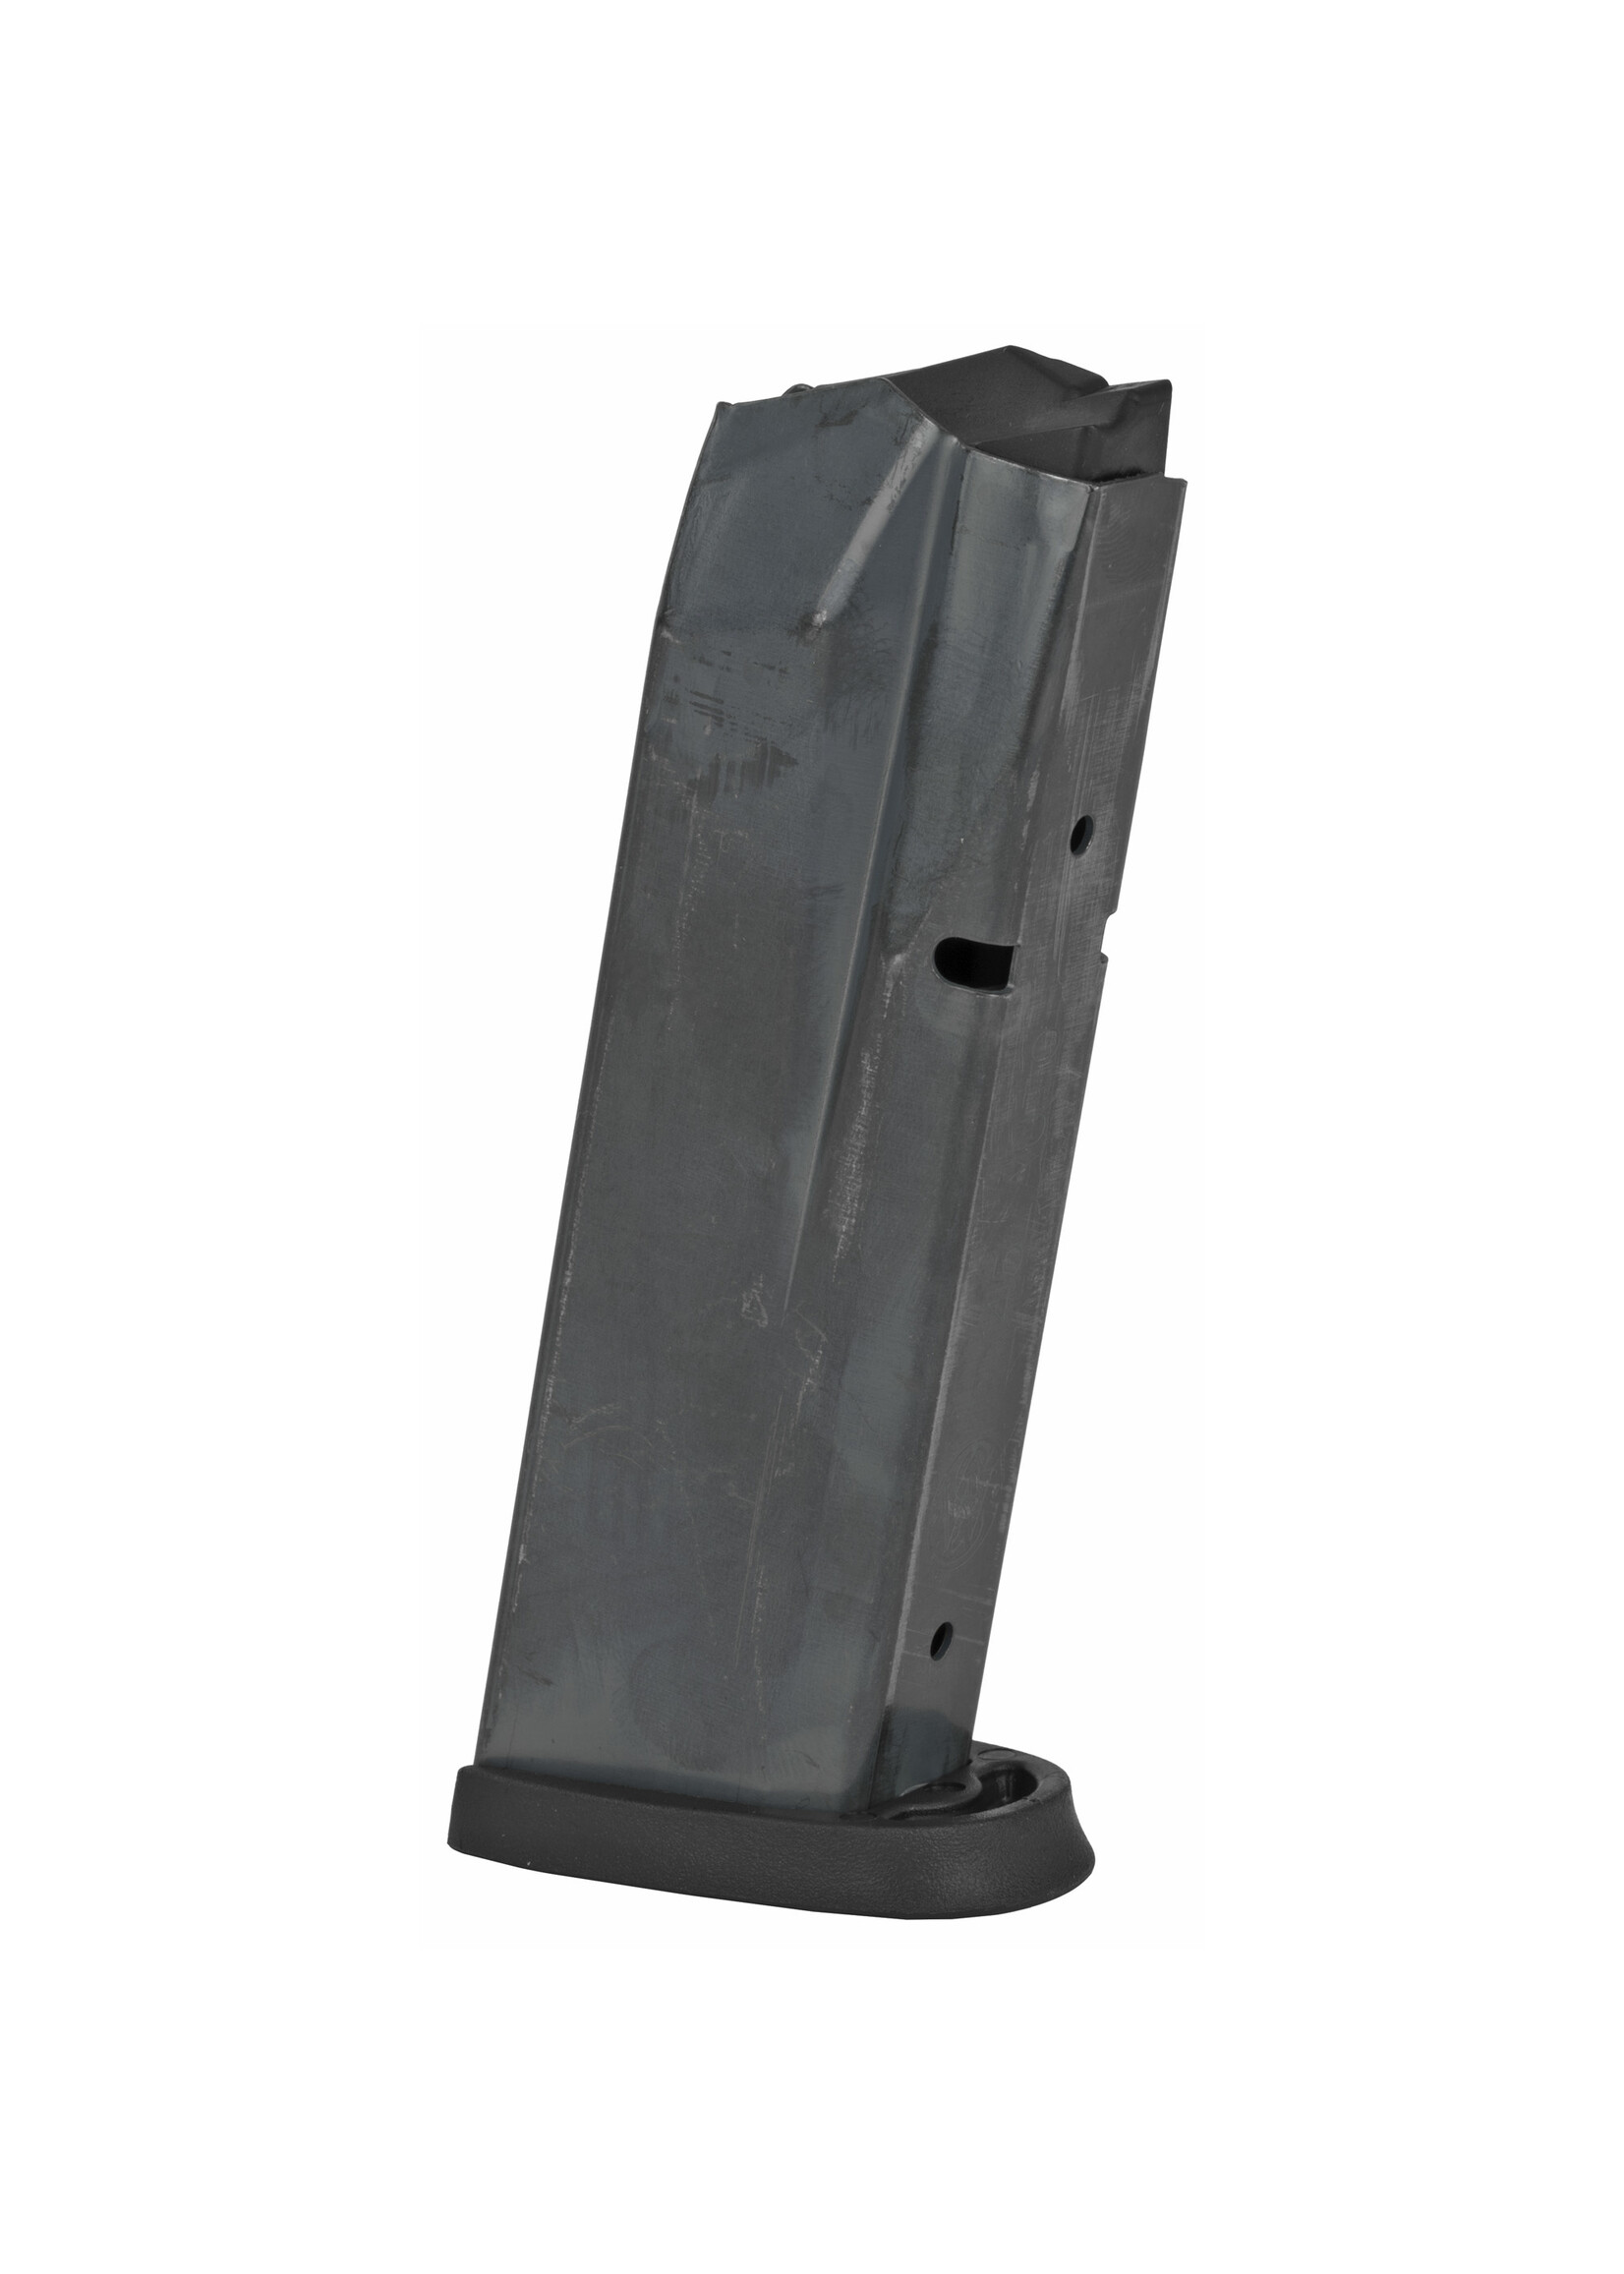 SMITH & WESSON SMITH & WESSON M&P45 10RD MAGAZINE